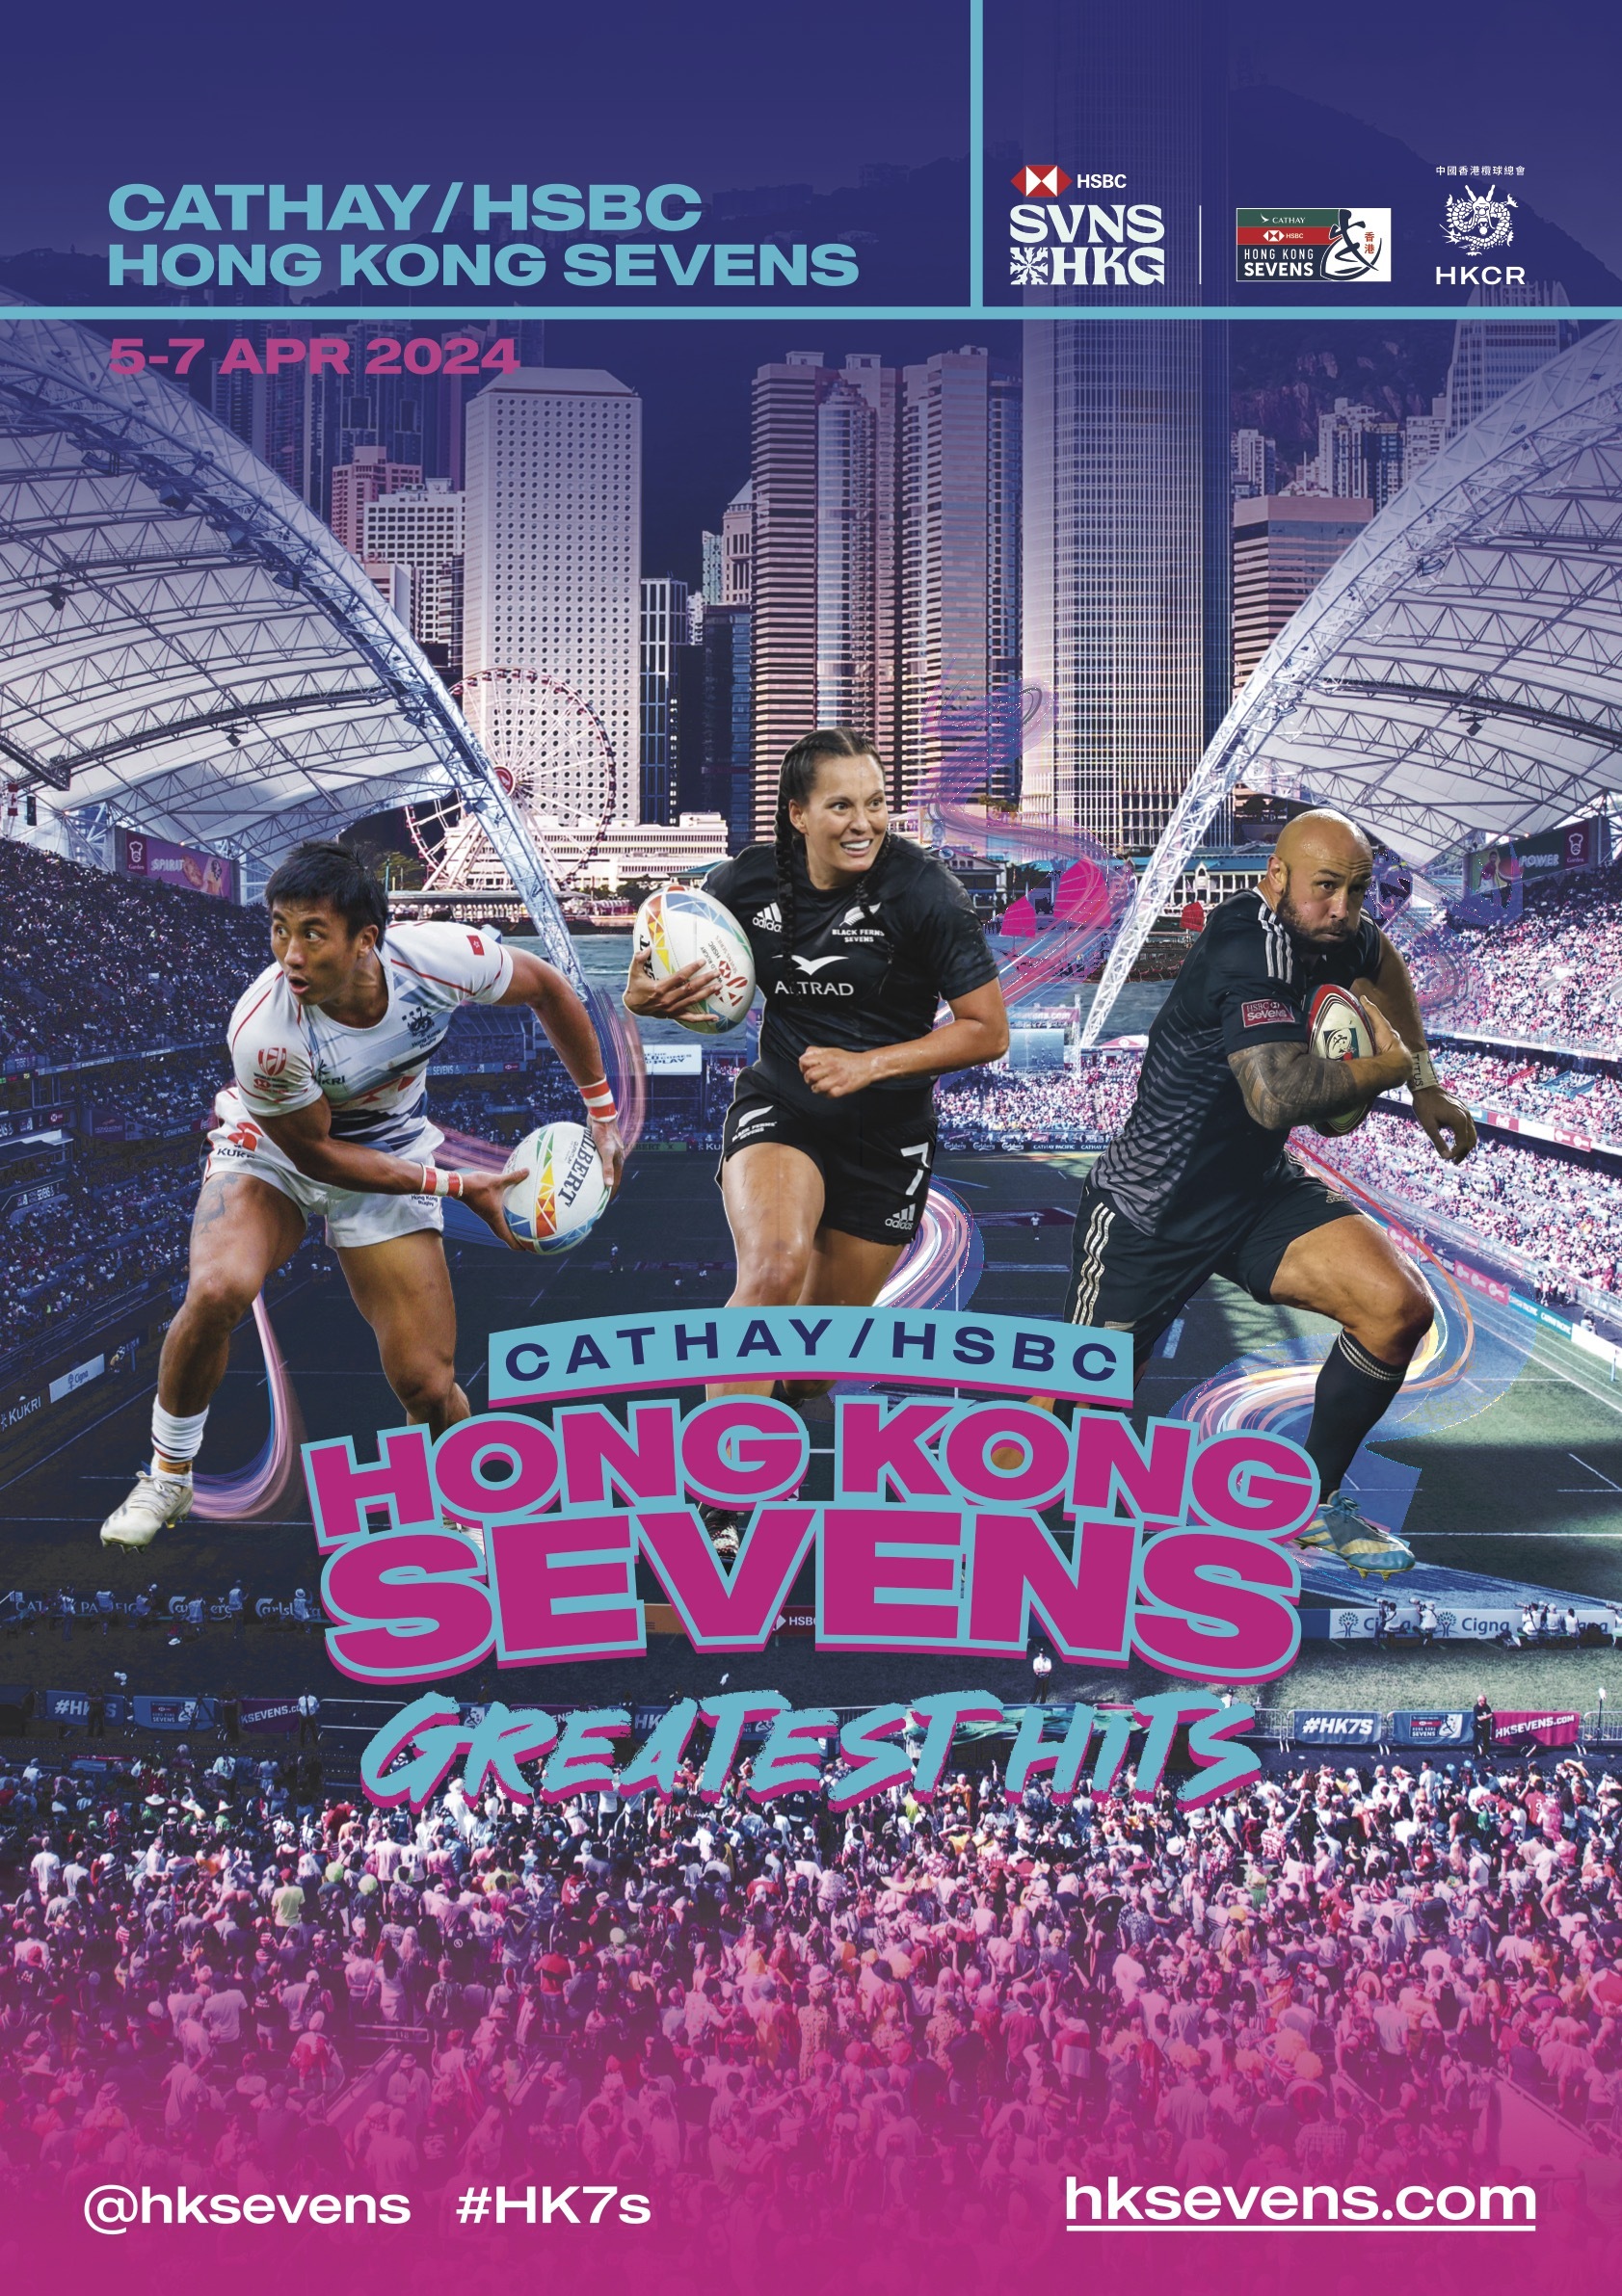 CATHAY/HSBC HONG KONG SEVENS APPROACHING FIRST SELLOUT SINCE PANDEMIC